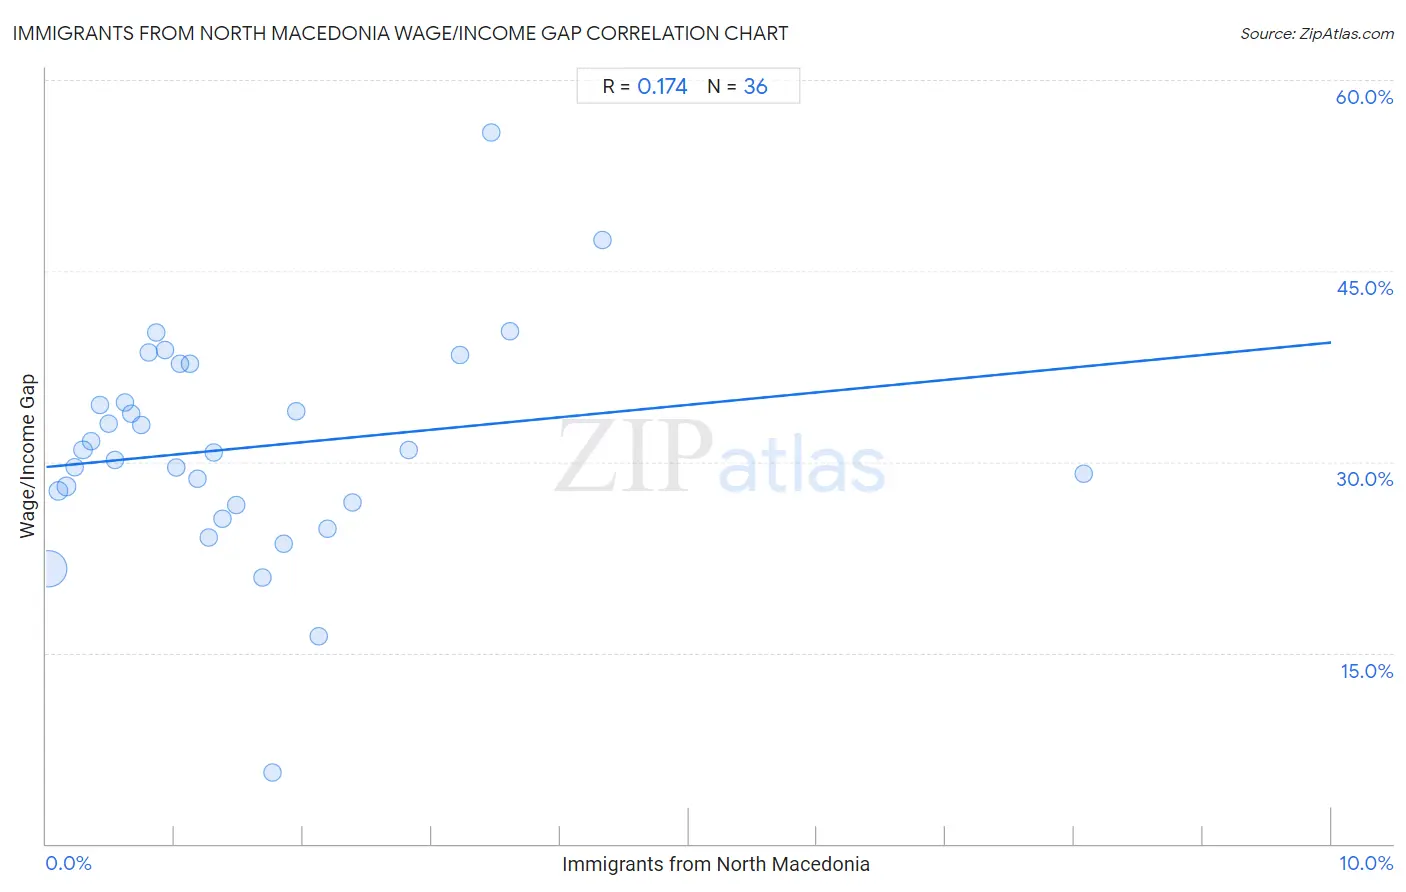 Immigrants from North Macedonia Wage/Income Gap